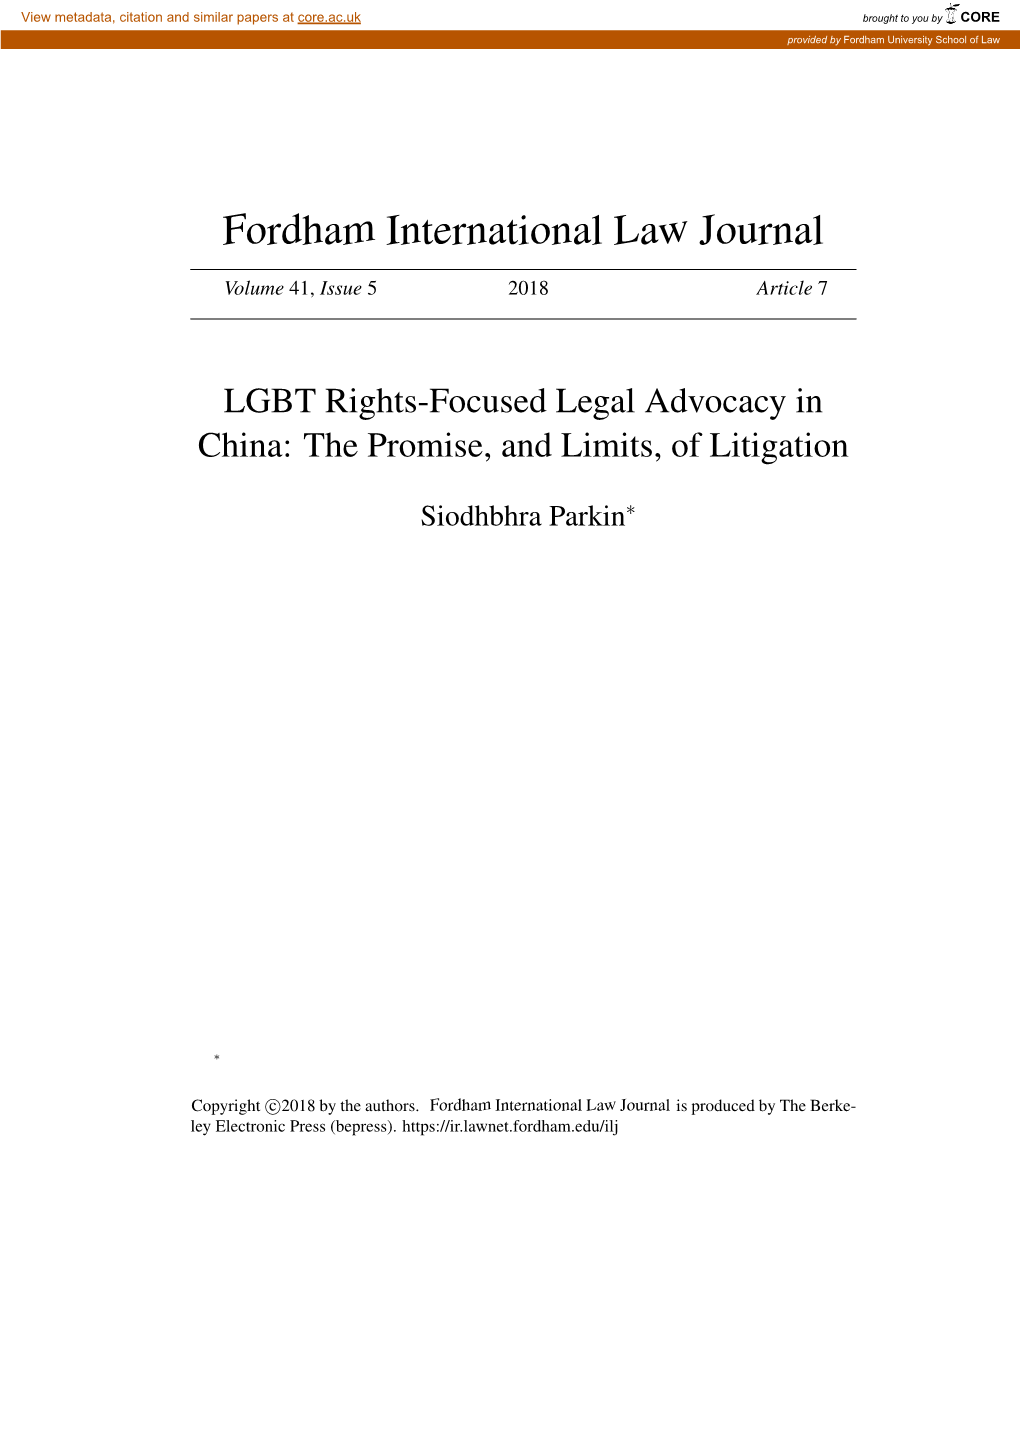 LGBT Rights-Focused Legal Advocacy in China: the Promise, and Limits, of Litigation